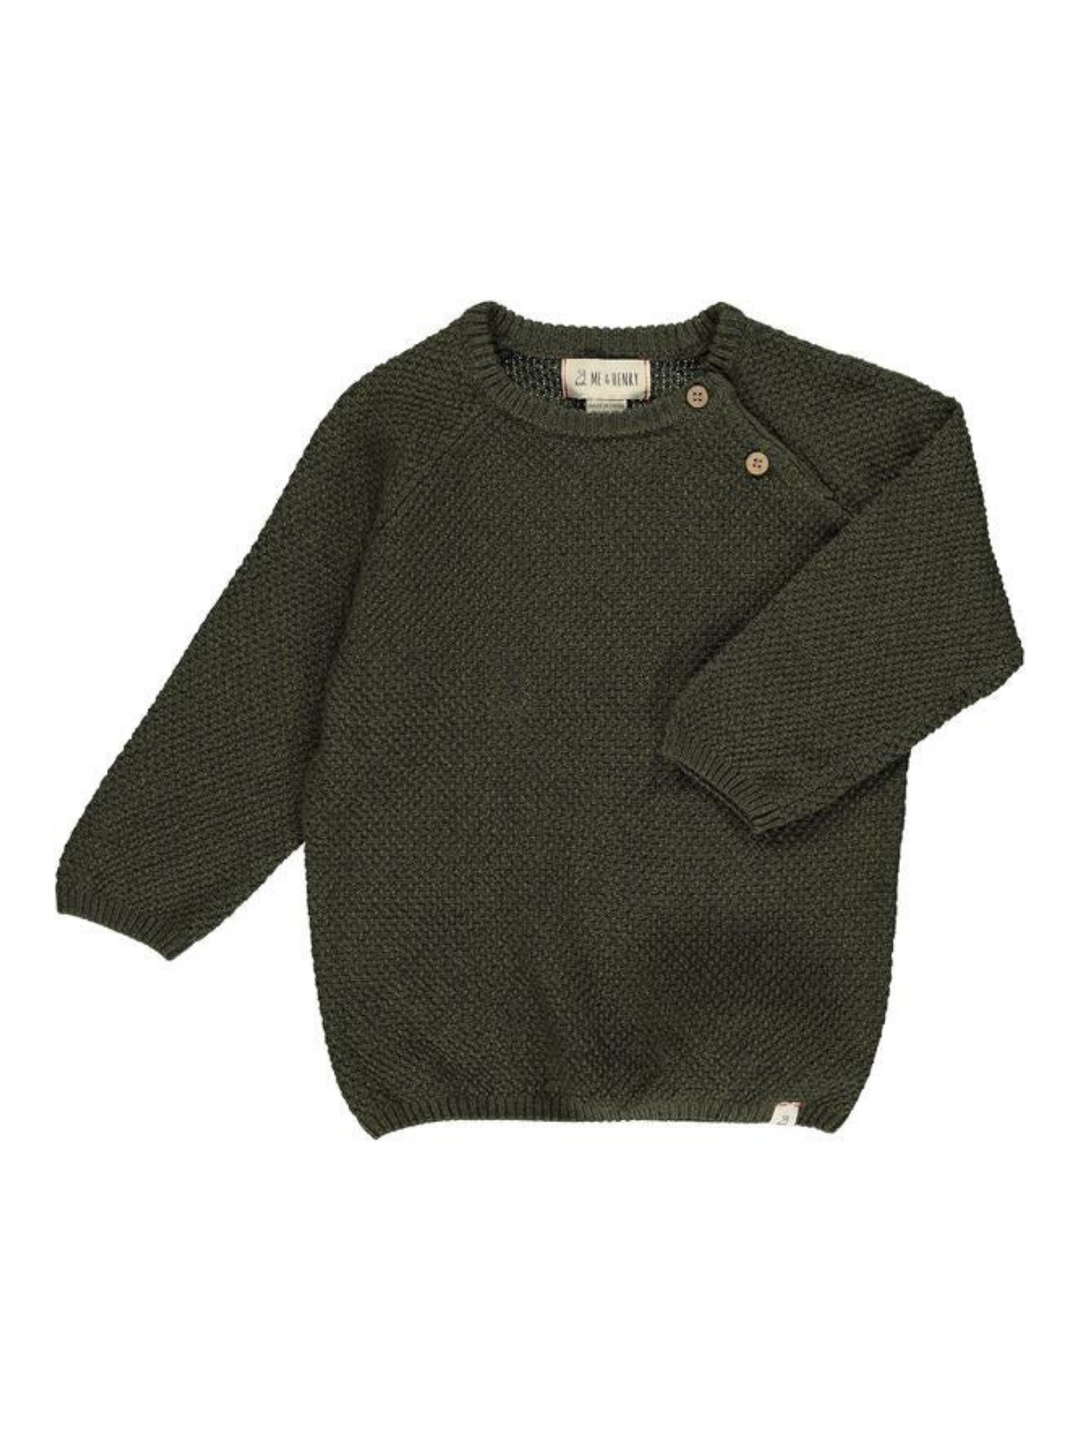 Morrison Baby Sweater - Green | Me & Henry